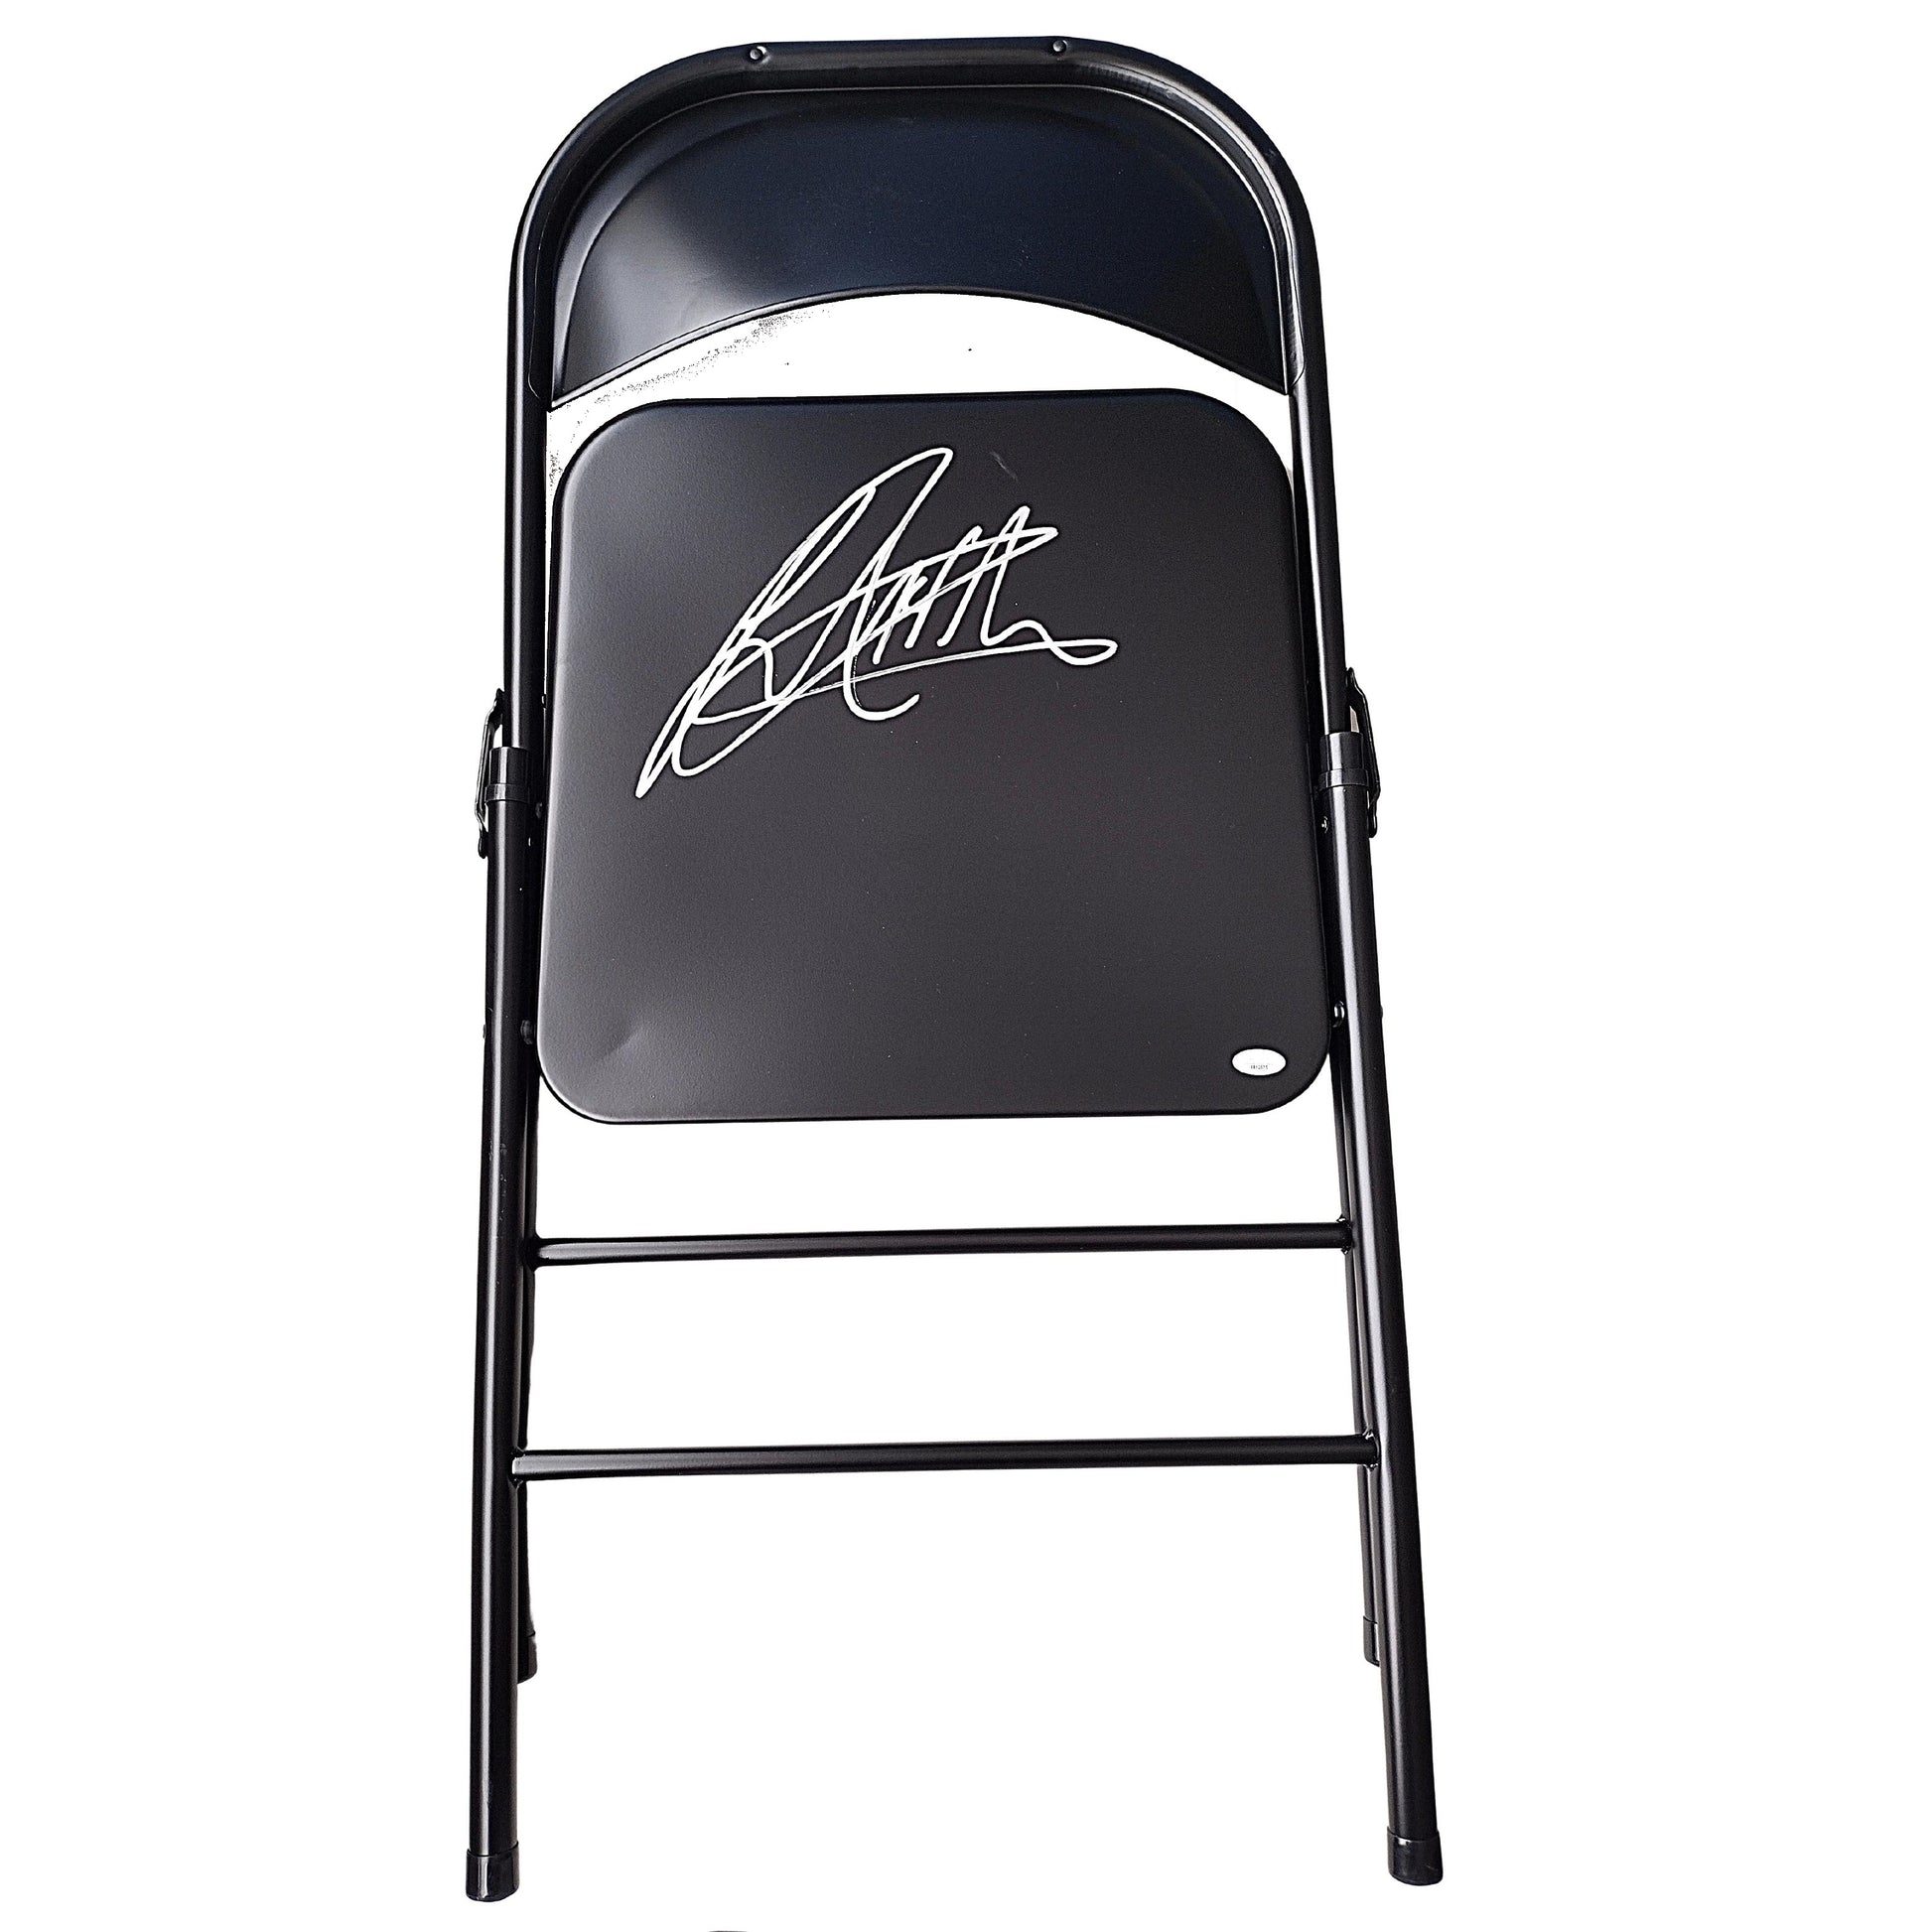 Wrestling- Autographed- Drew McIntyre Signed Full Size Black Steel Folding Chair WWE Superstars Proof Photo JSA Certified Authentic 101